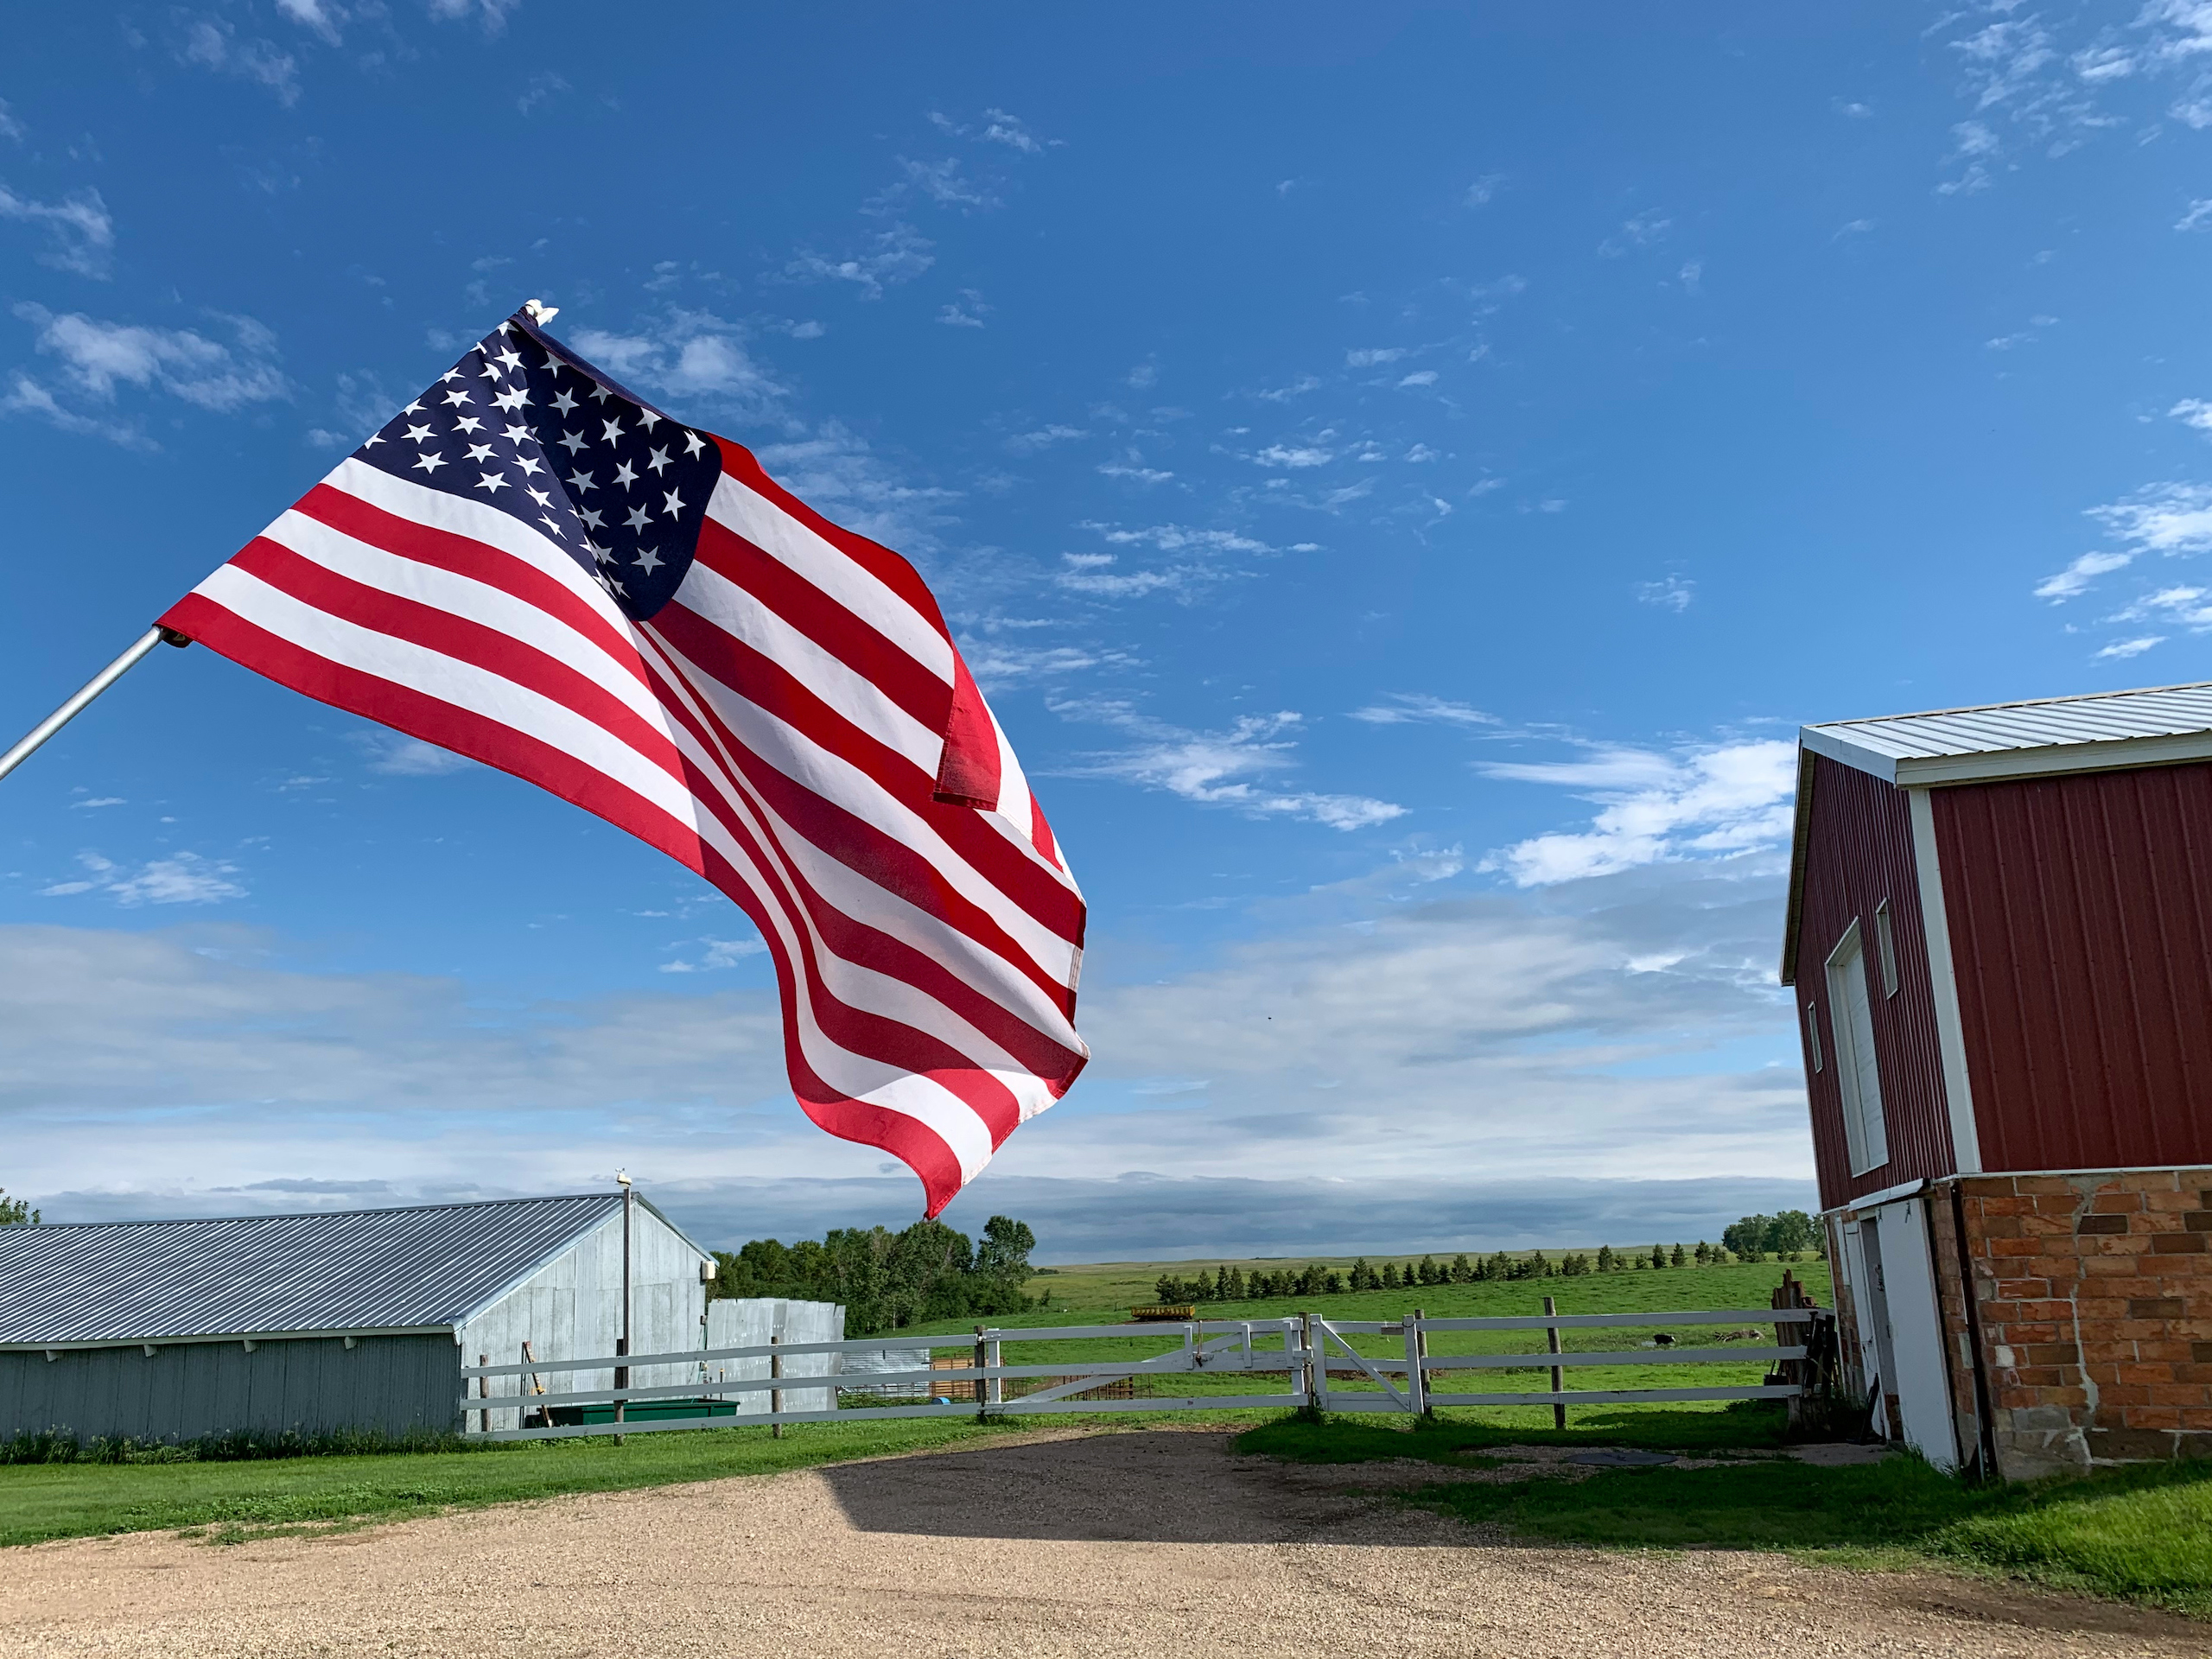 ow angle close up view of American Flag against a blue sky with fluffy white clouds with american farm buildings in background